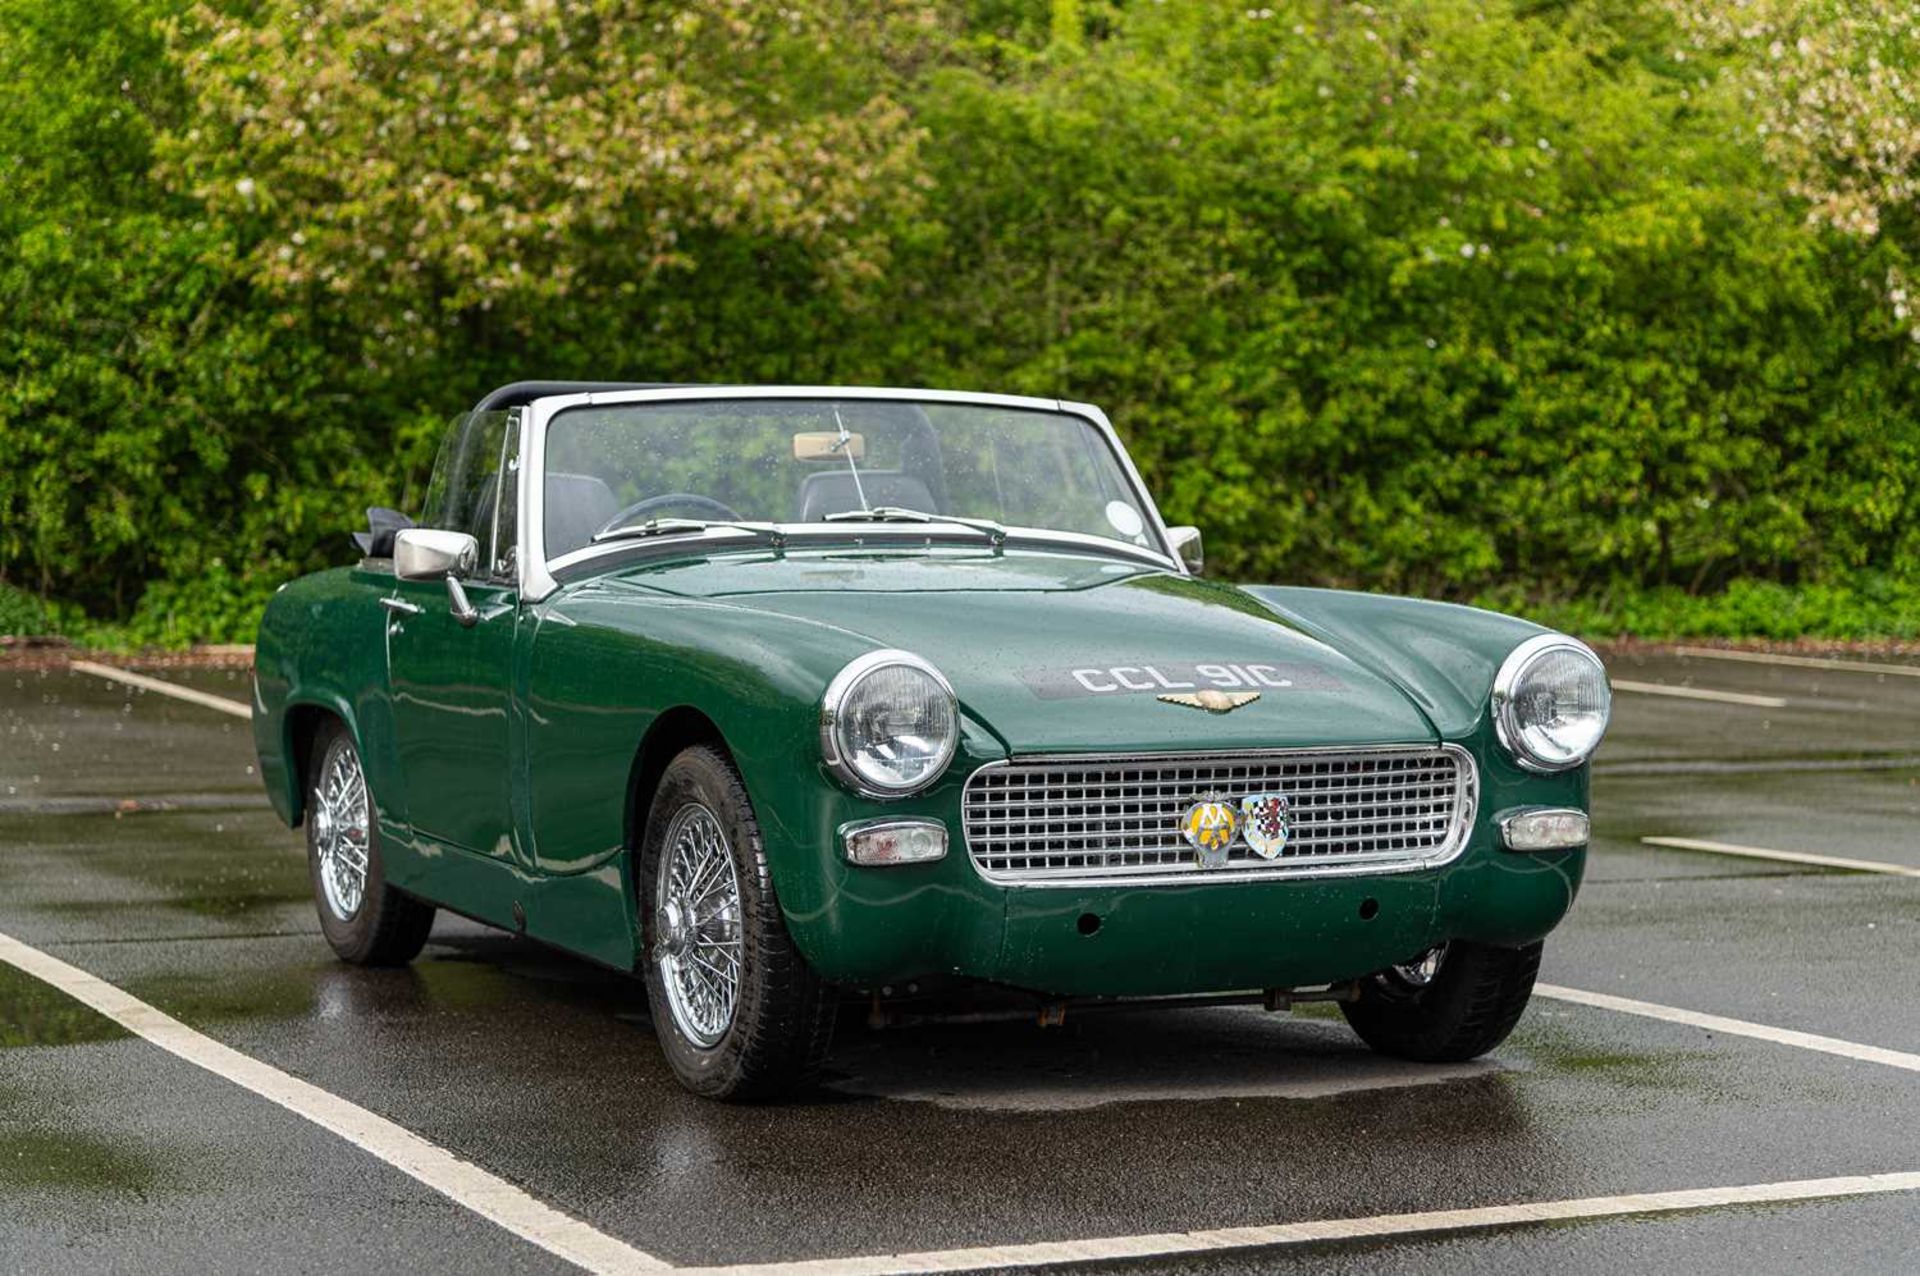 1965 Austin-Healey Sprite Formerly the property of British Formula One racing driver David Piper - Image 6 of 71